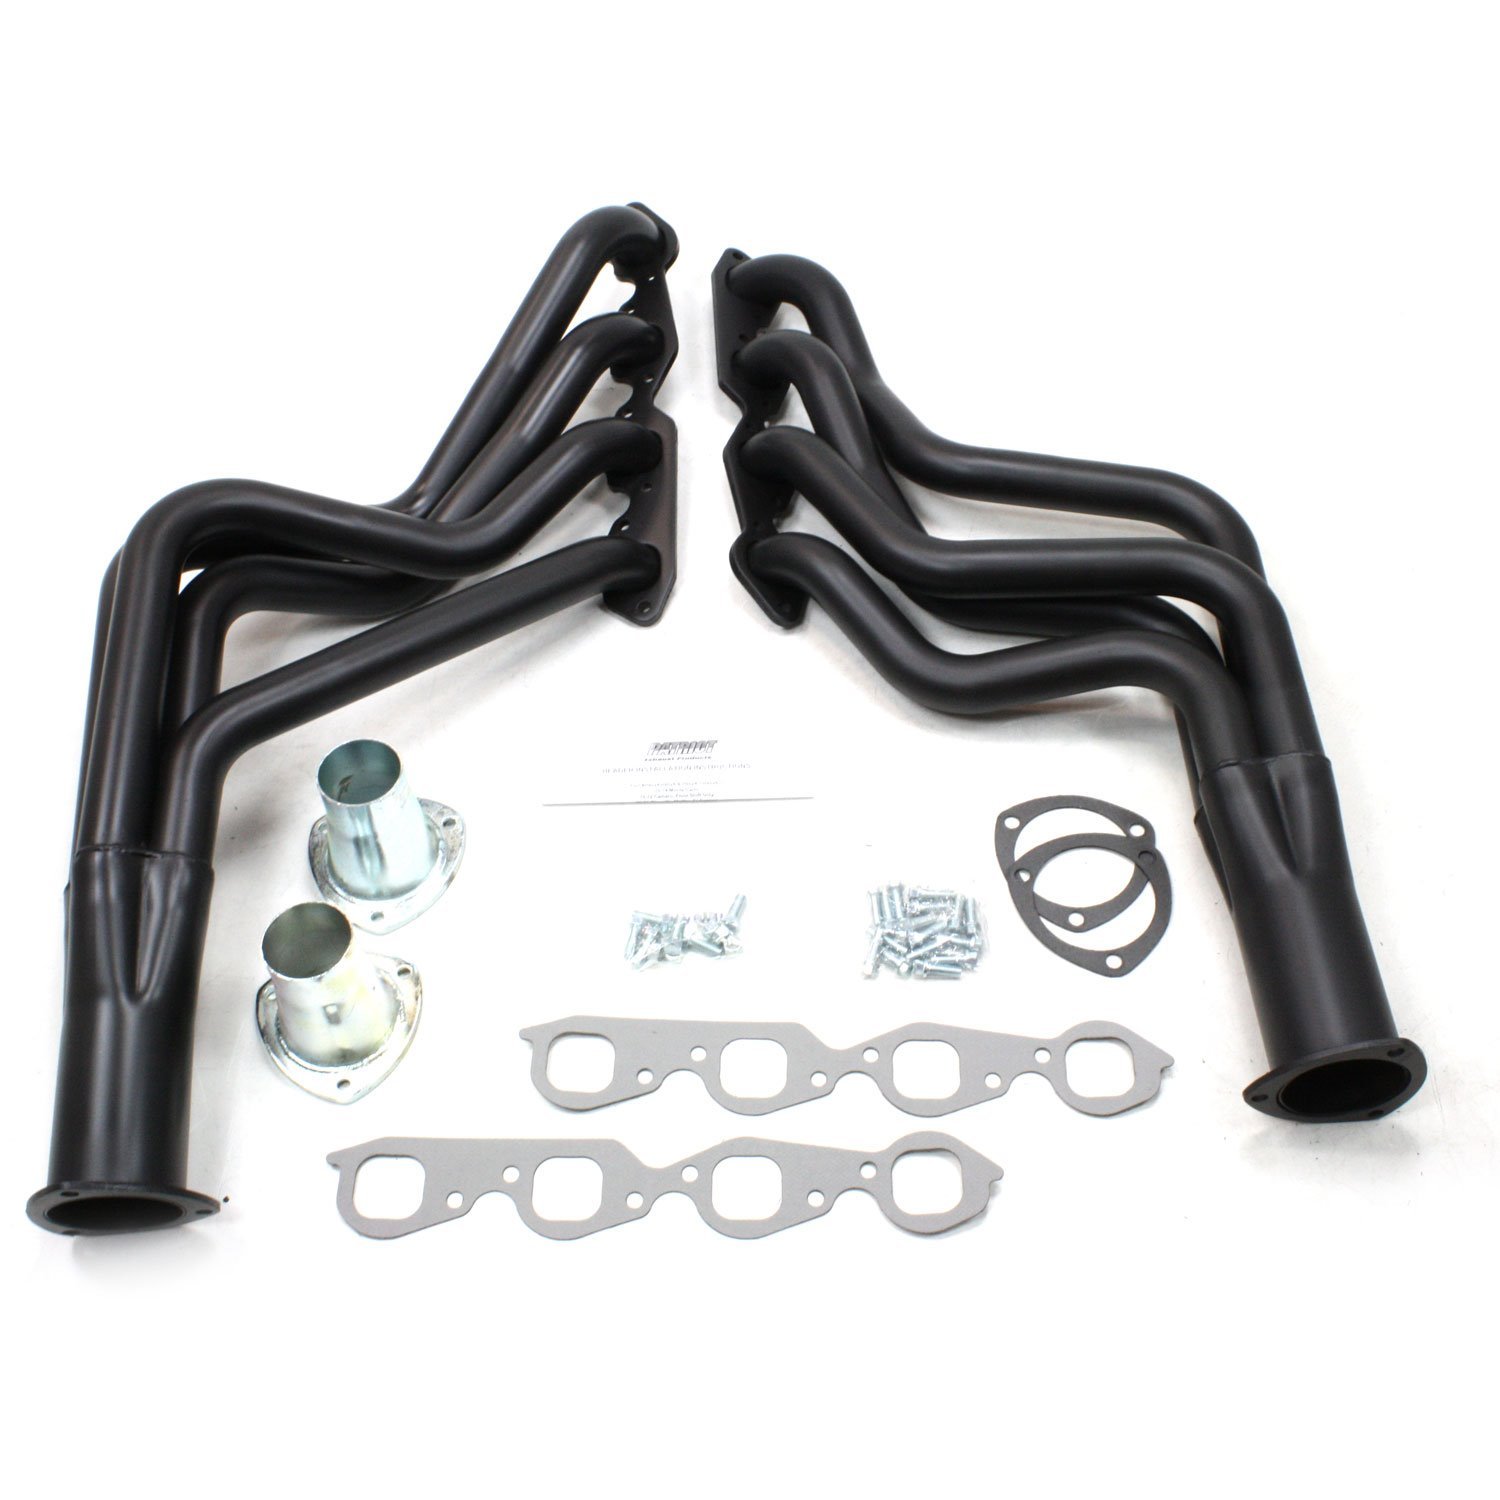 GM Specific Fit Headers 1971-1974 Full Size Passenger